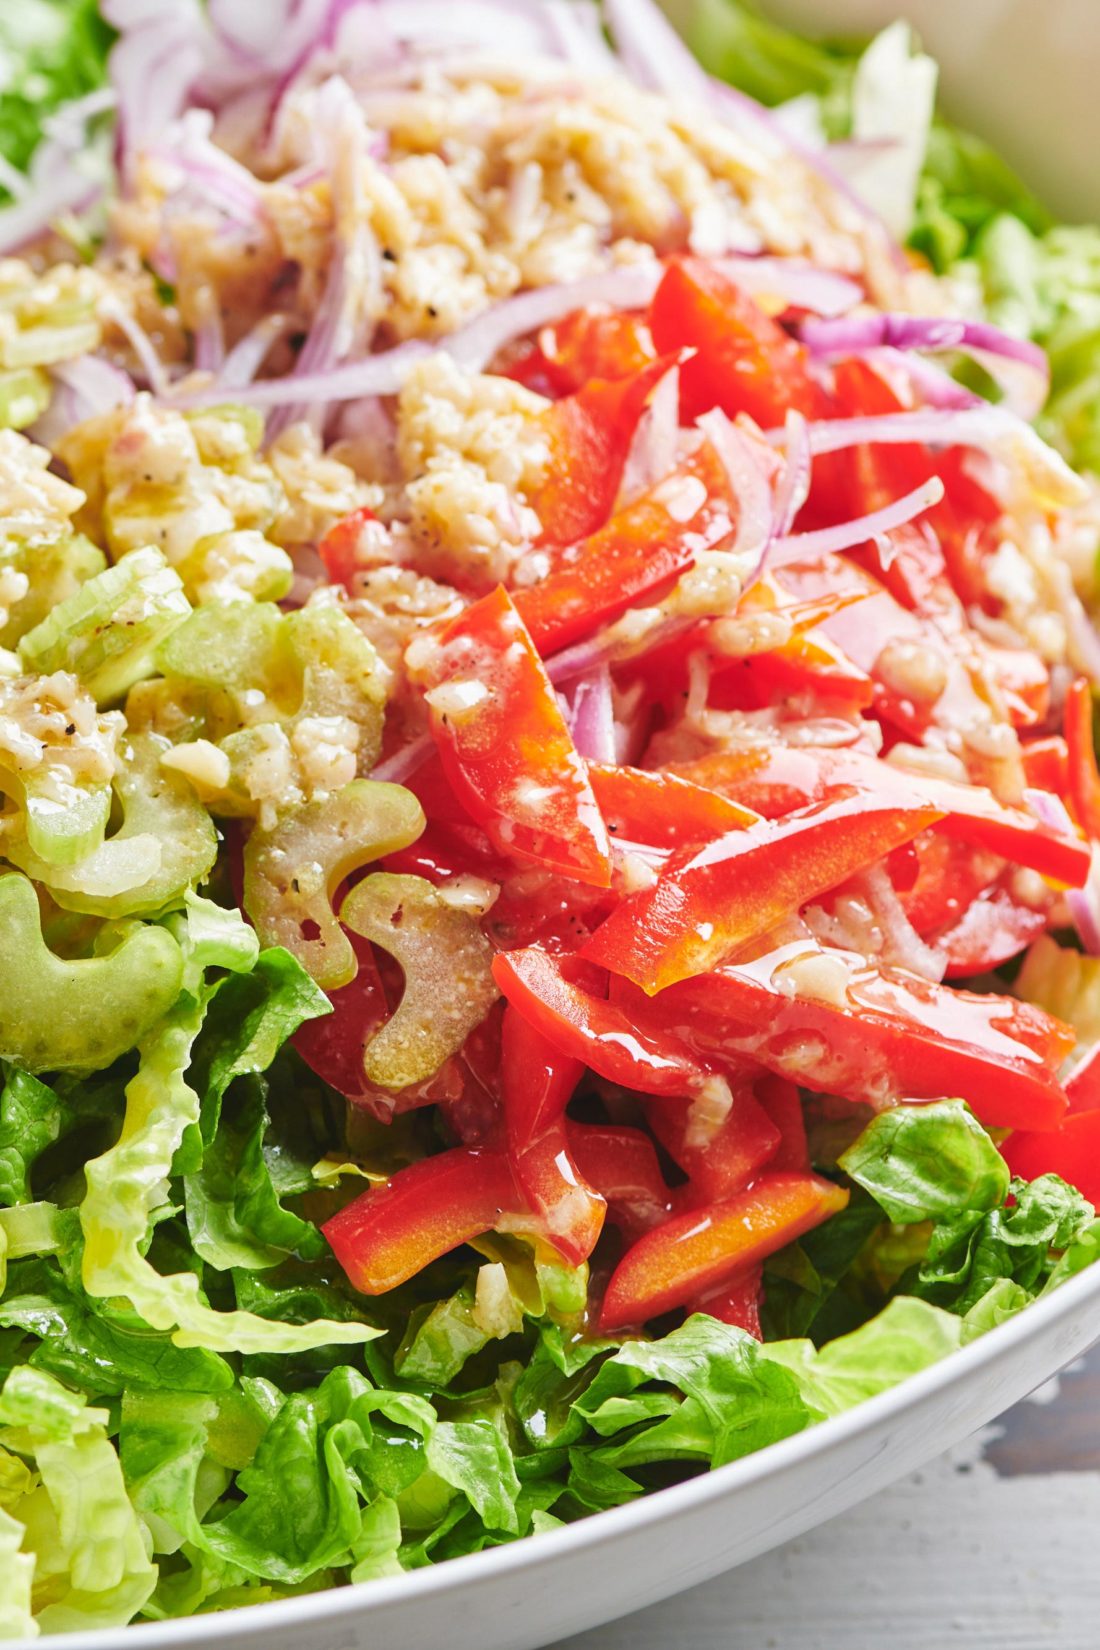 Romaine Salad topped with red onion, red bell pepper, and celery.